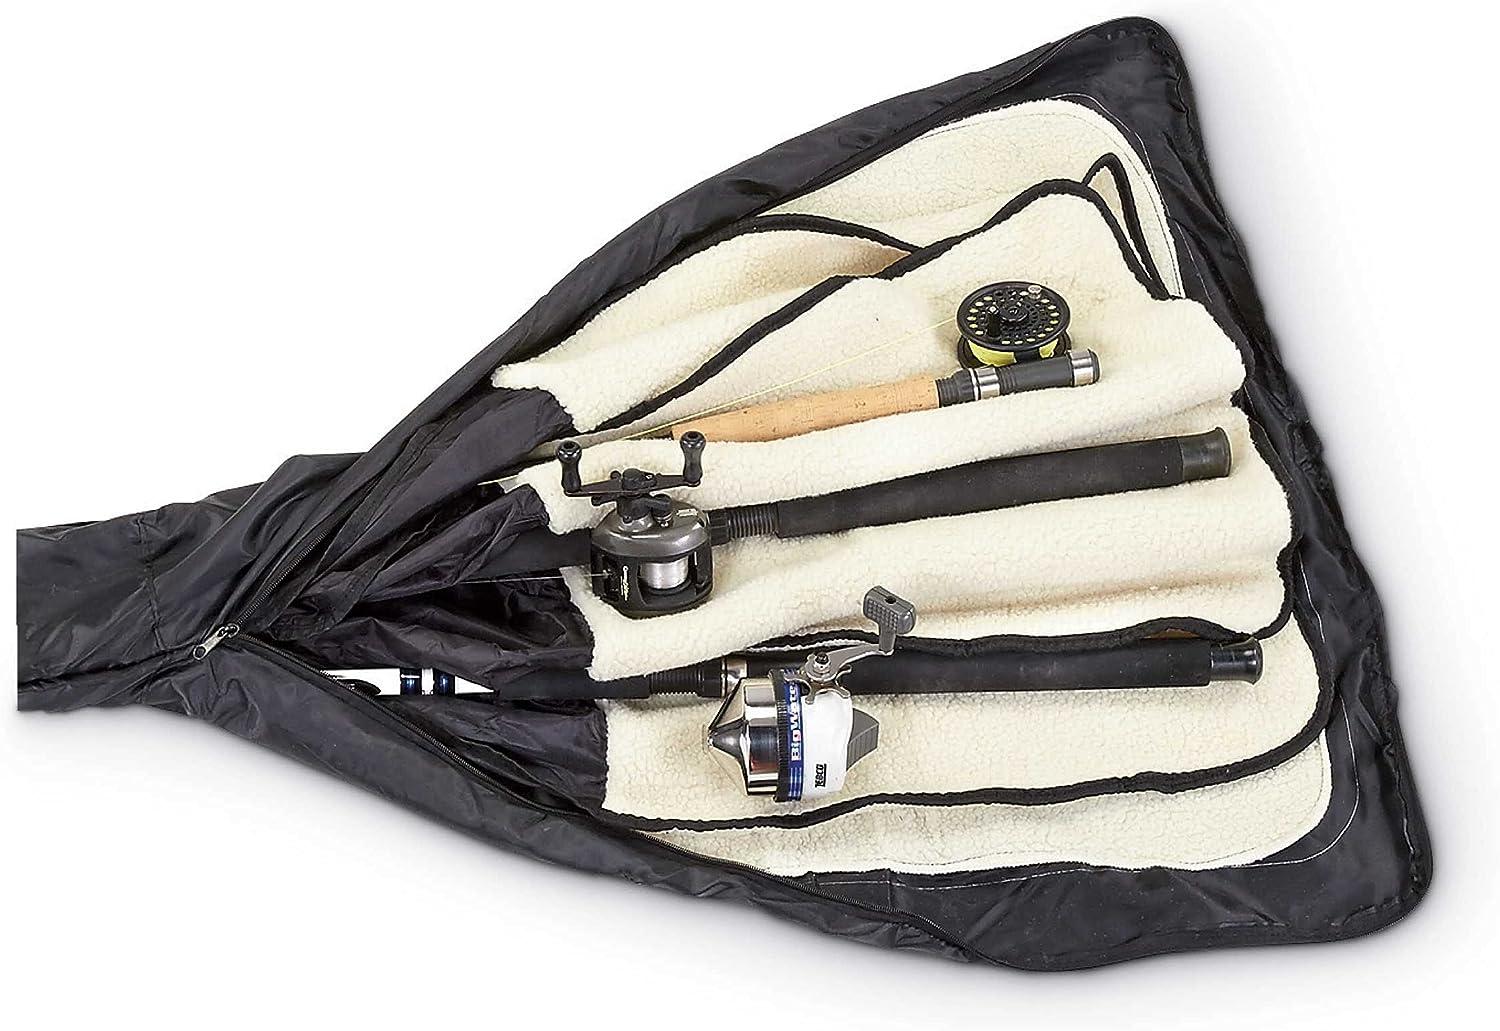 Fly Fishing Rods Case, Travel, Carry Case Accessories, Adjustable Shoulder  Strap Fishing Rods Bag, Protector, Portable Fishing Pole Storage Bag 